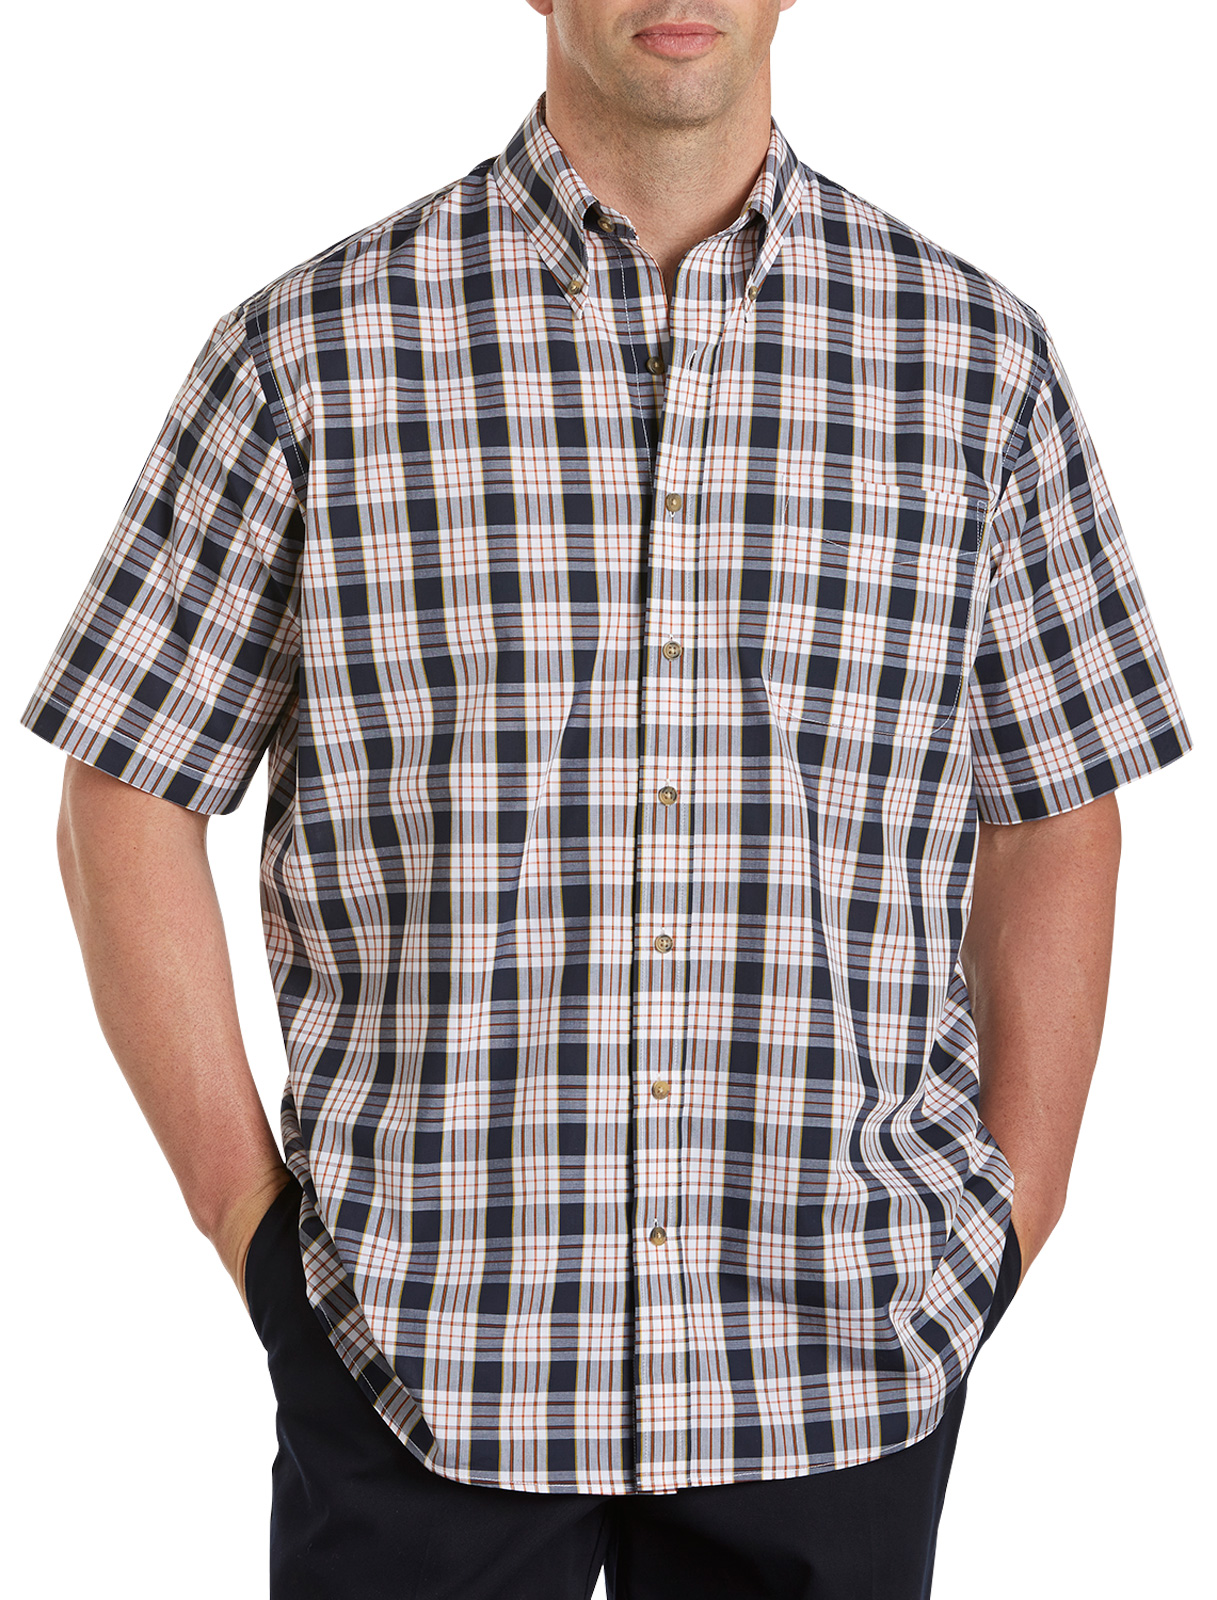 Harbor Bay Men's Big and Tall Easy-Care Large Plaid Sport Shirt